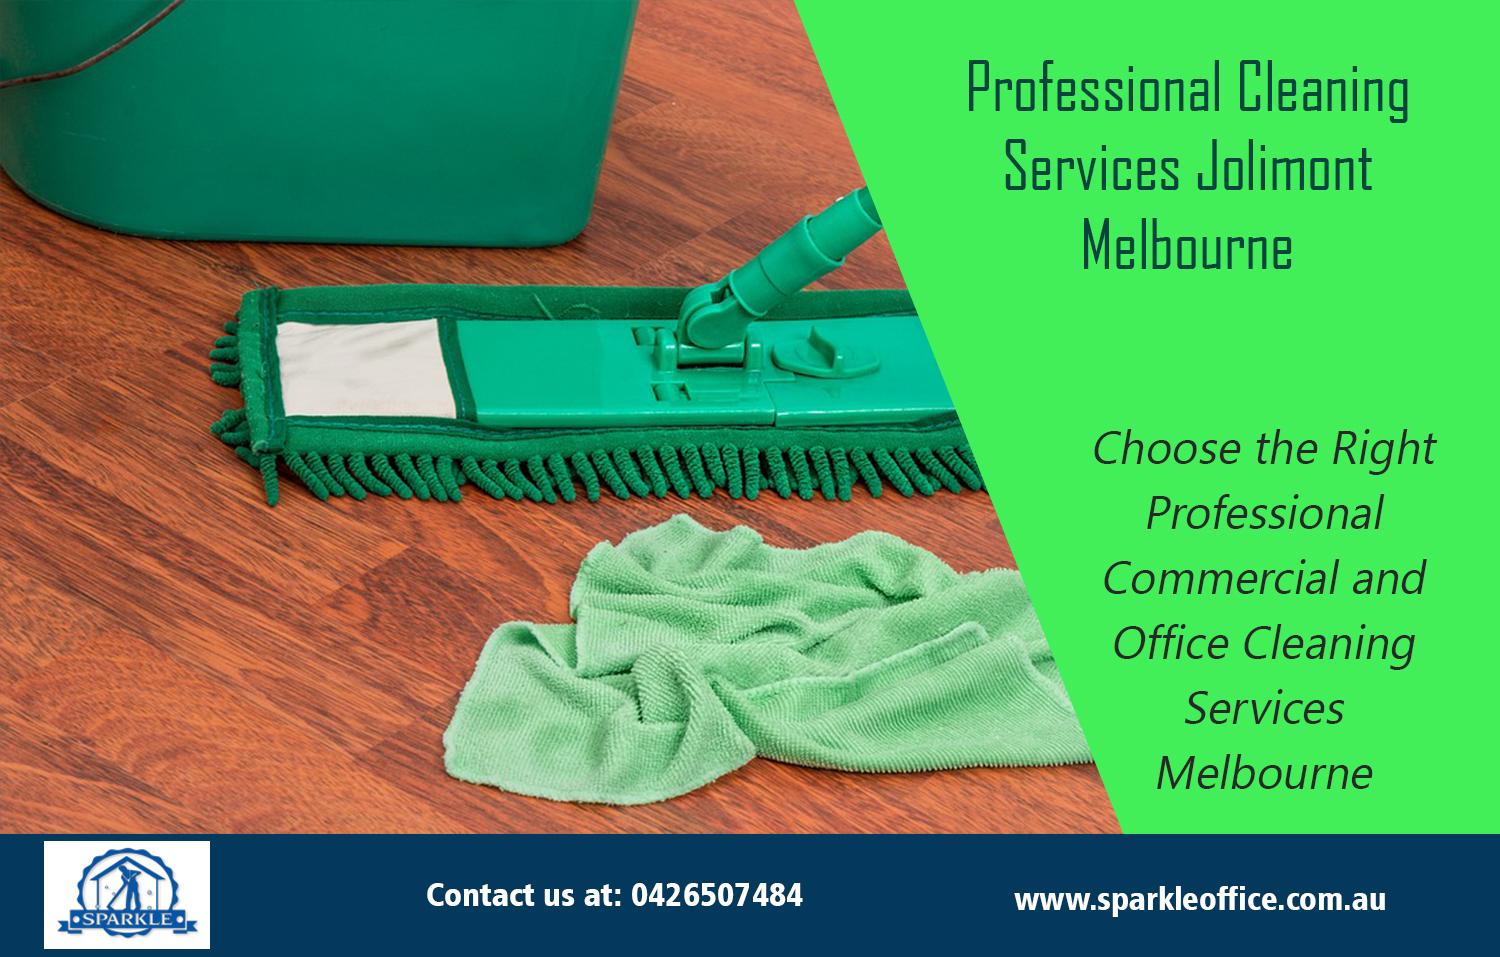 Professional Cleaning Services Jolimont Melbourne